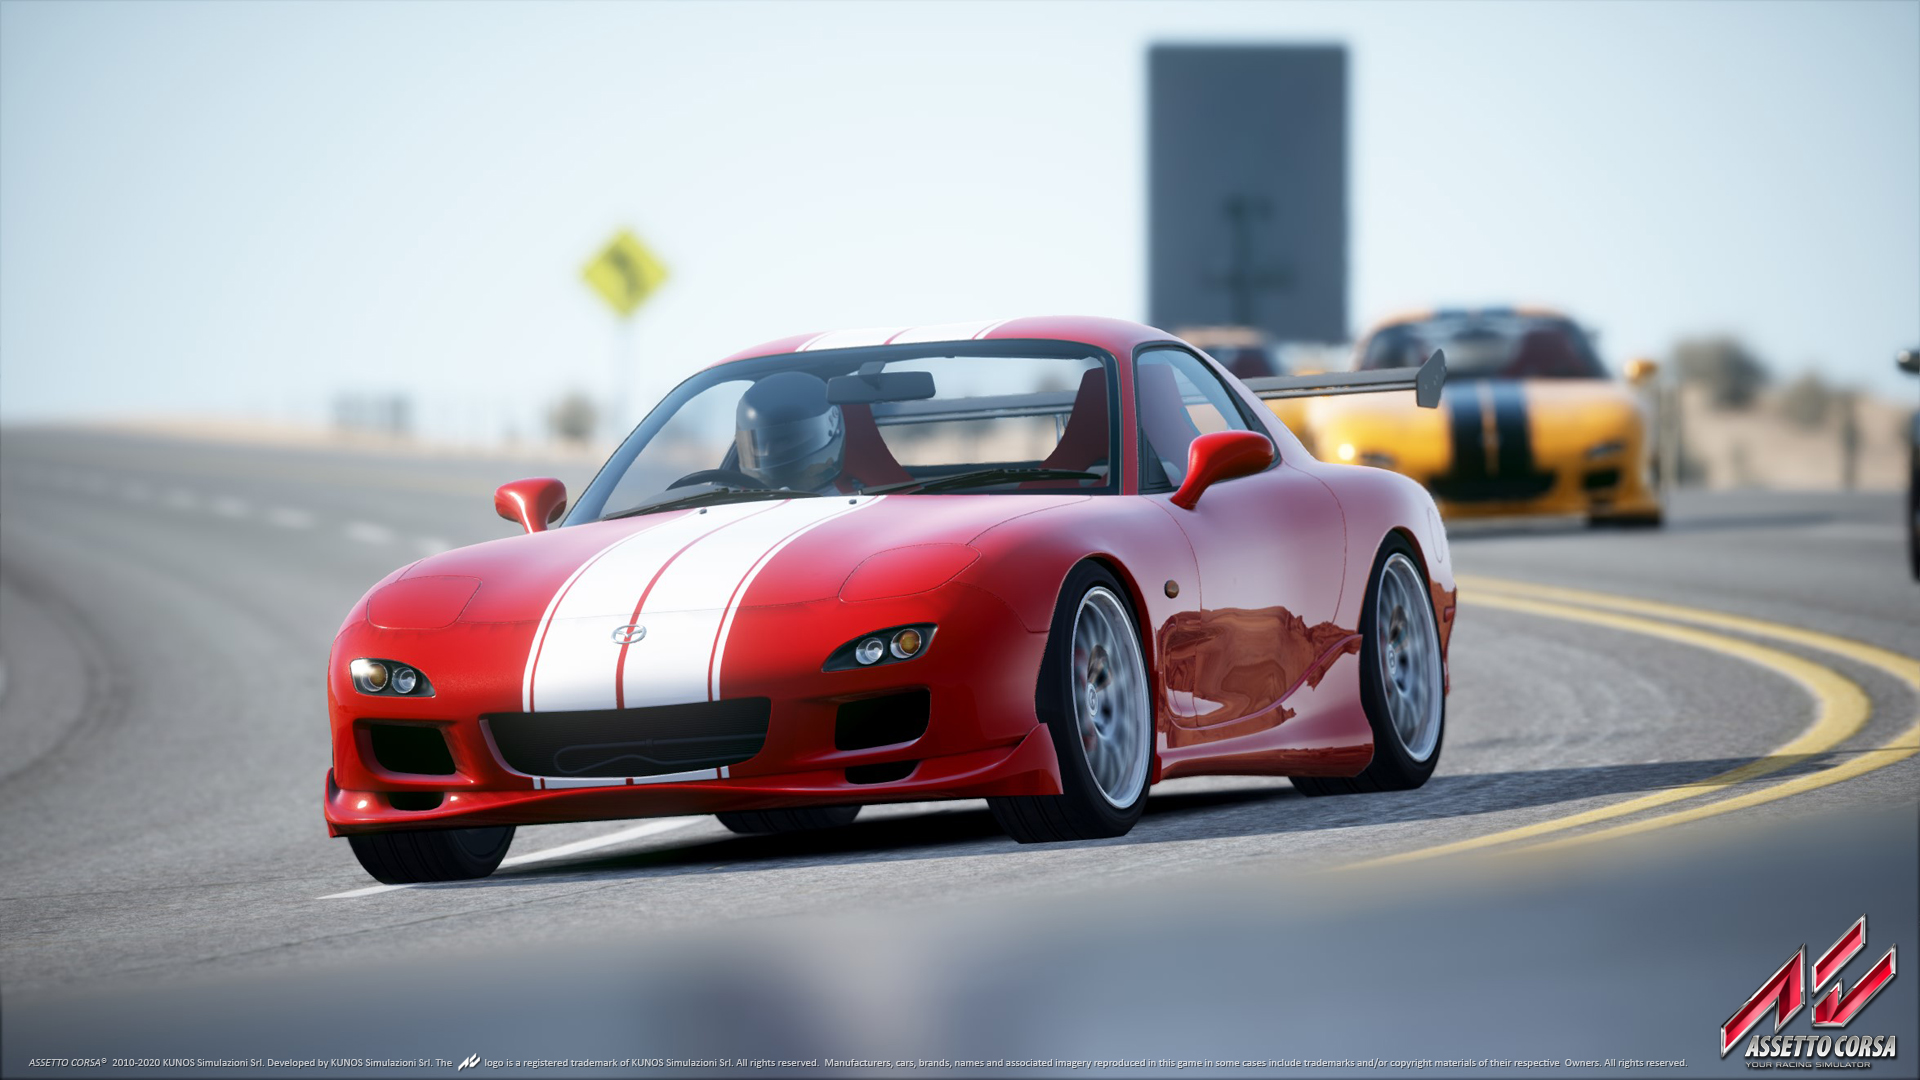 Assetto corsa - Japanese Pack Images 